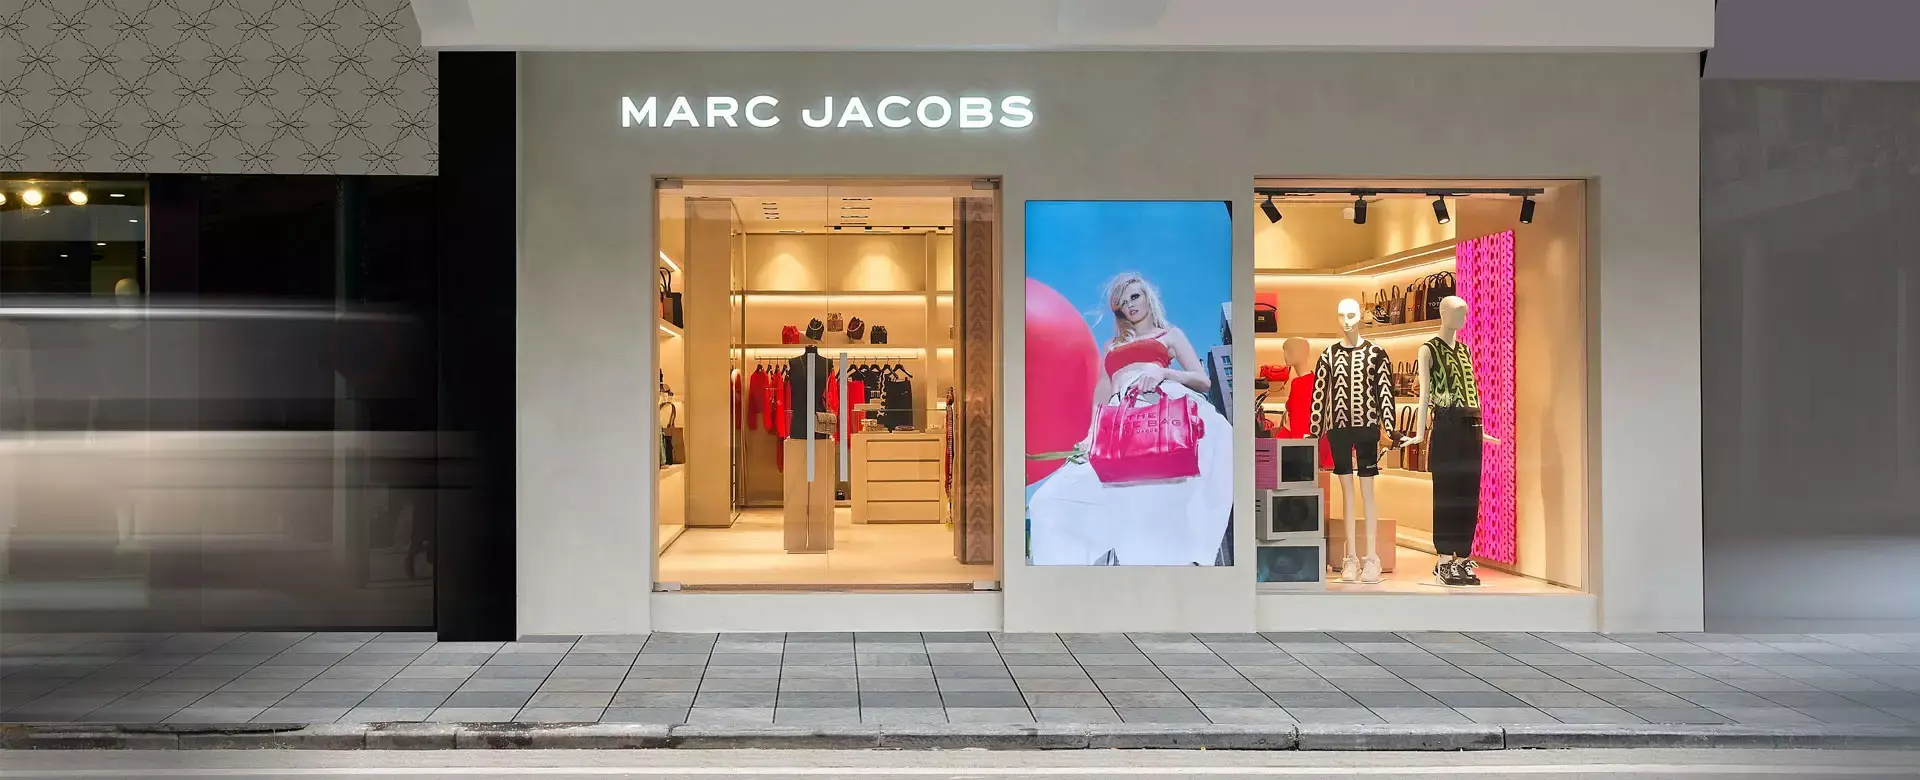 Marc-Jacobs-Store-thich-hang-ngoai